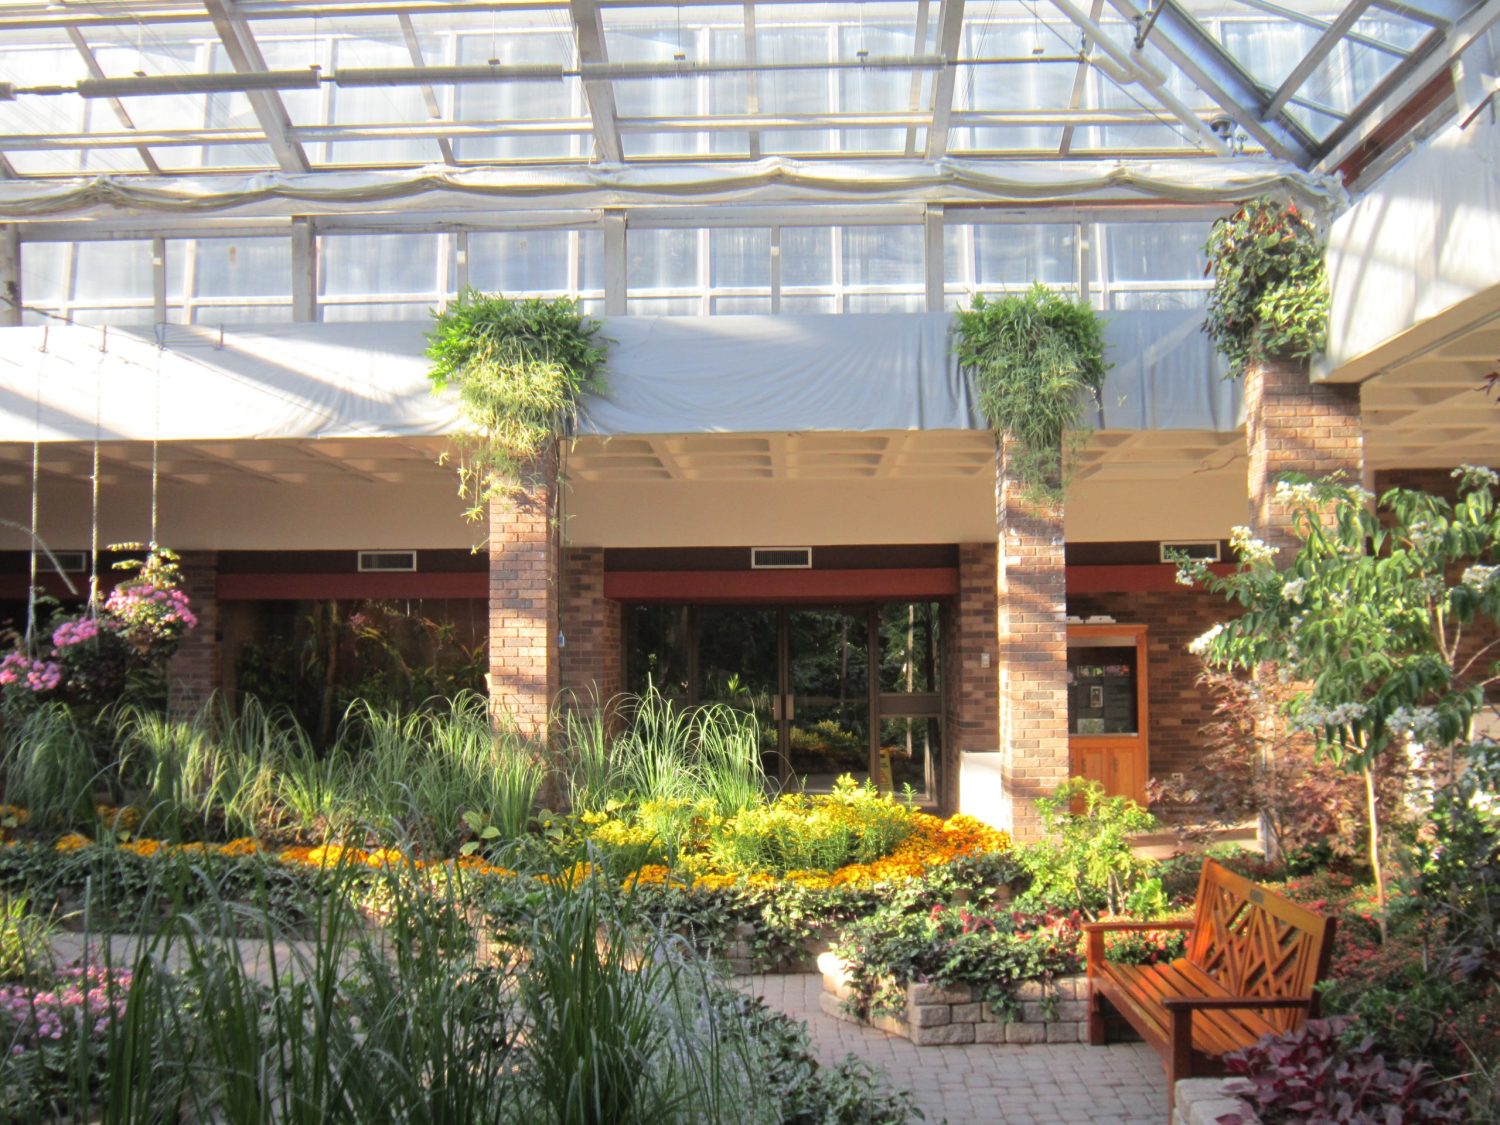 Image shows a brightly lit interior space with a skylight and lush vegetation. There are brick columns throughout.